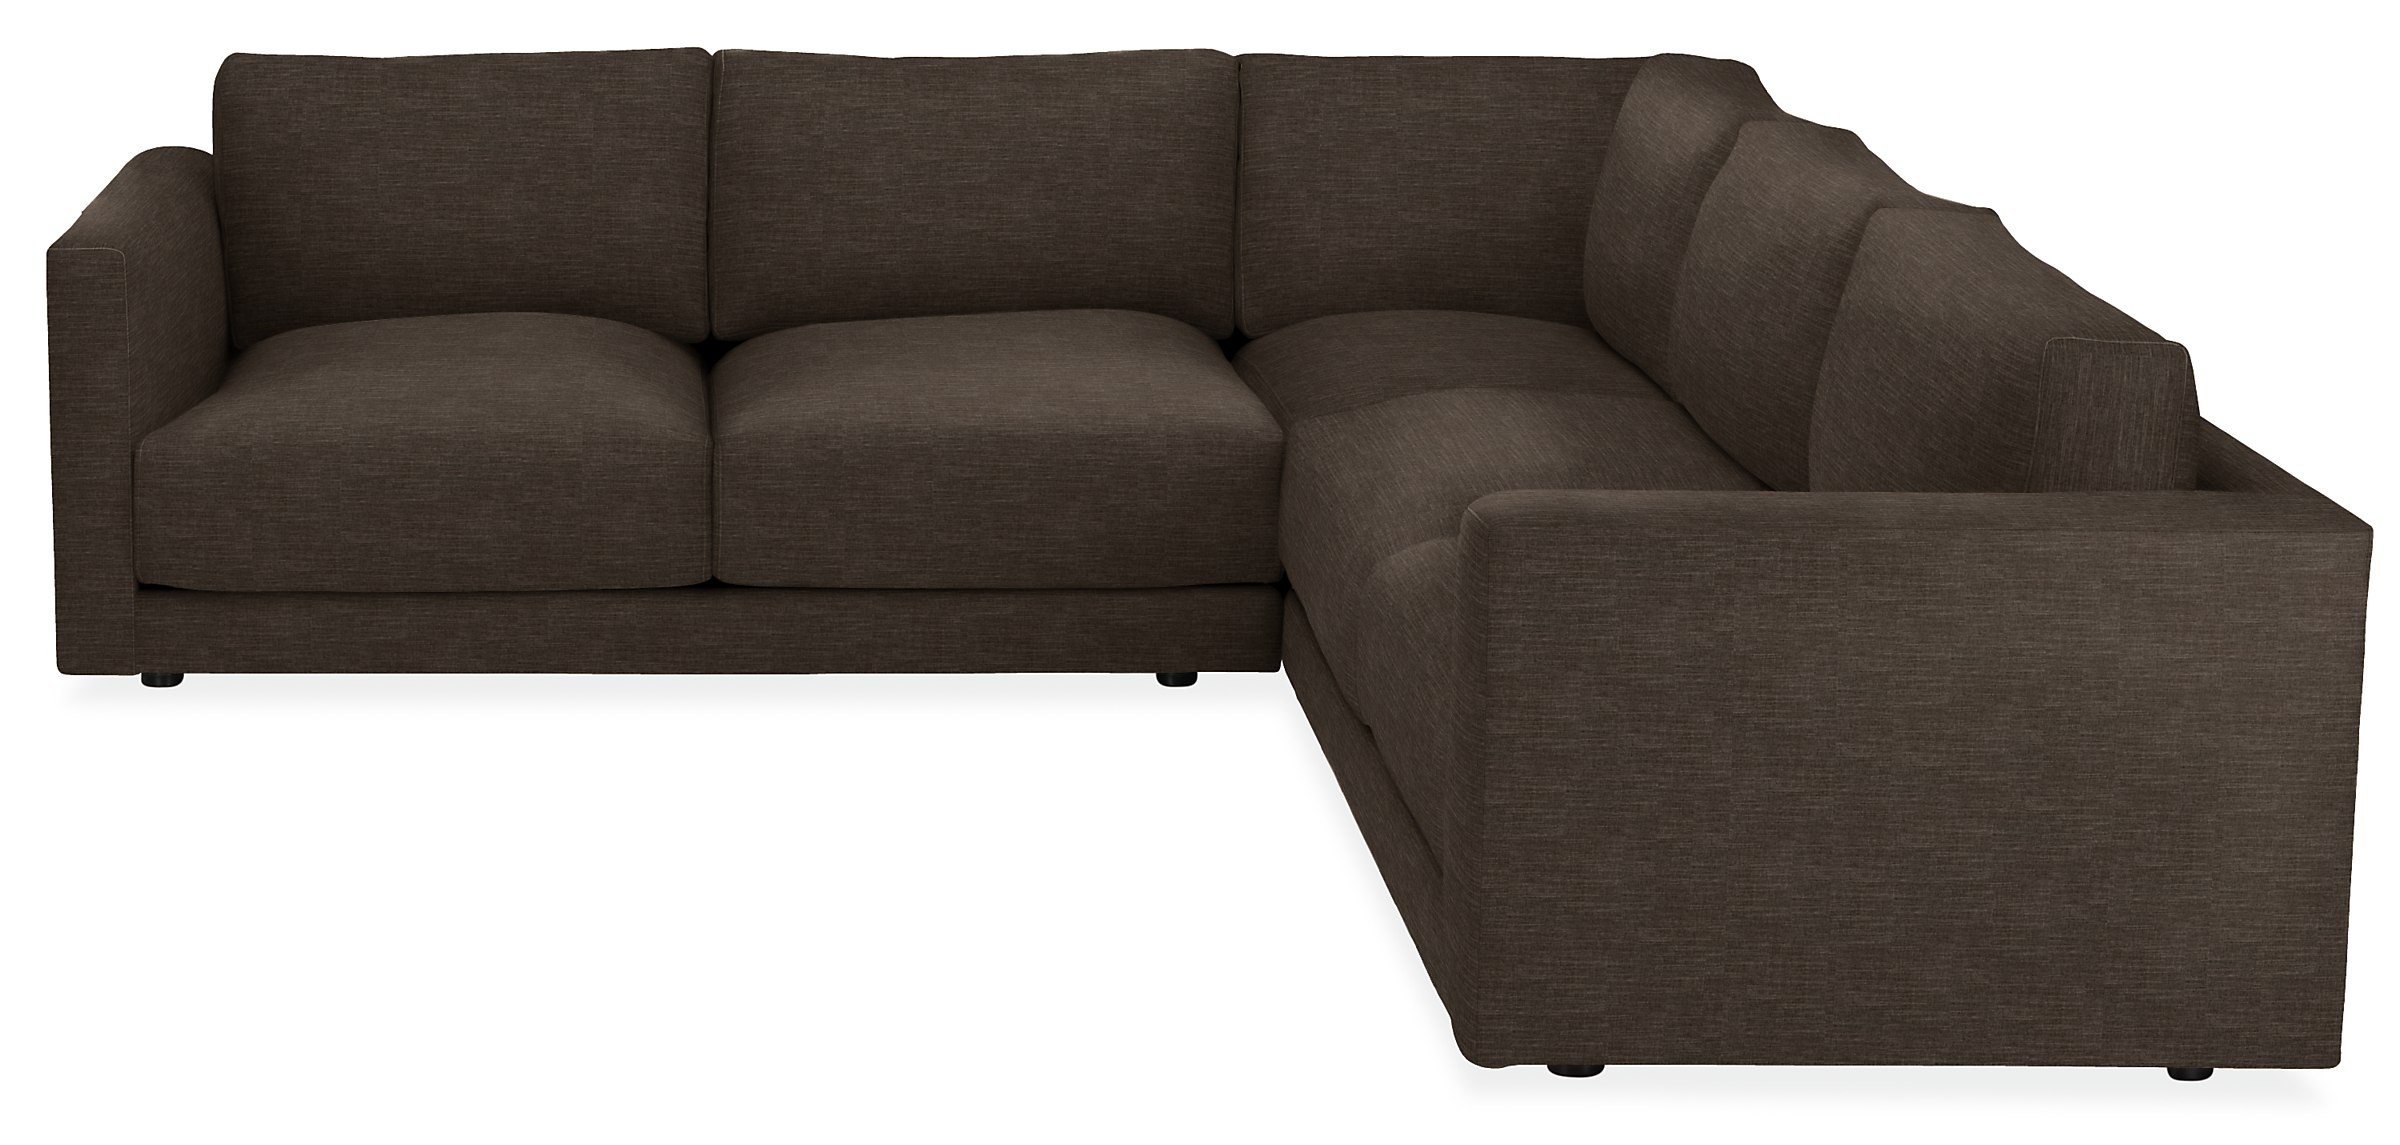 Clemens 104x104" Three-Piece Sectional